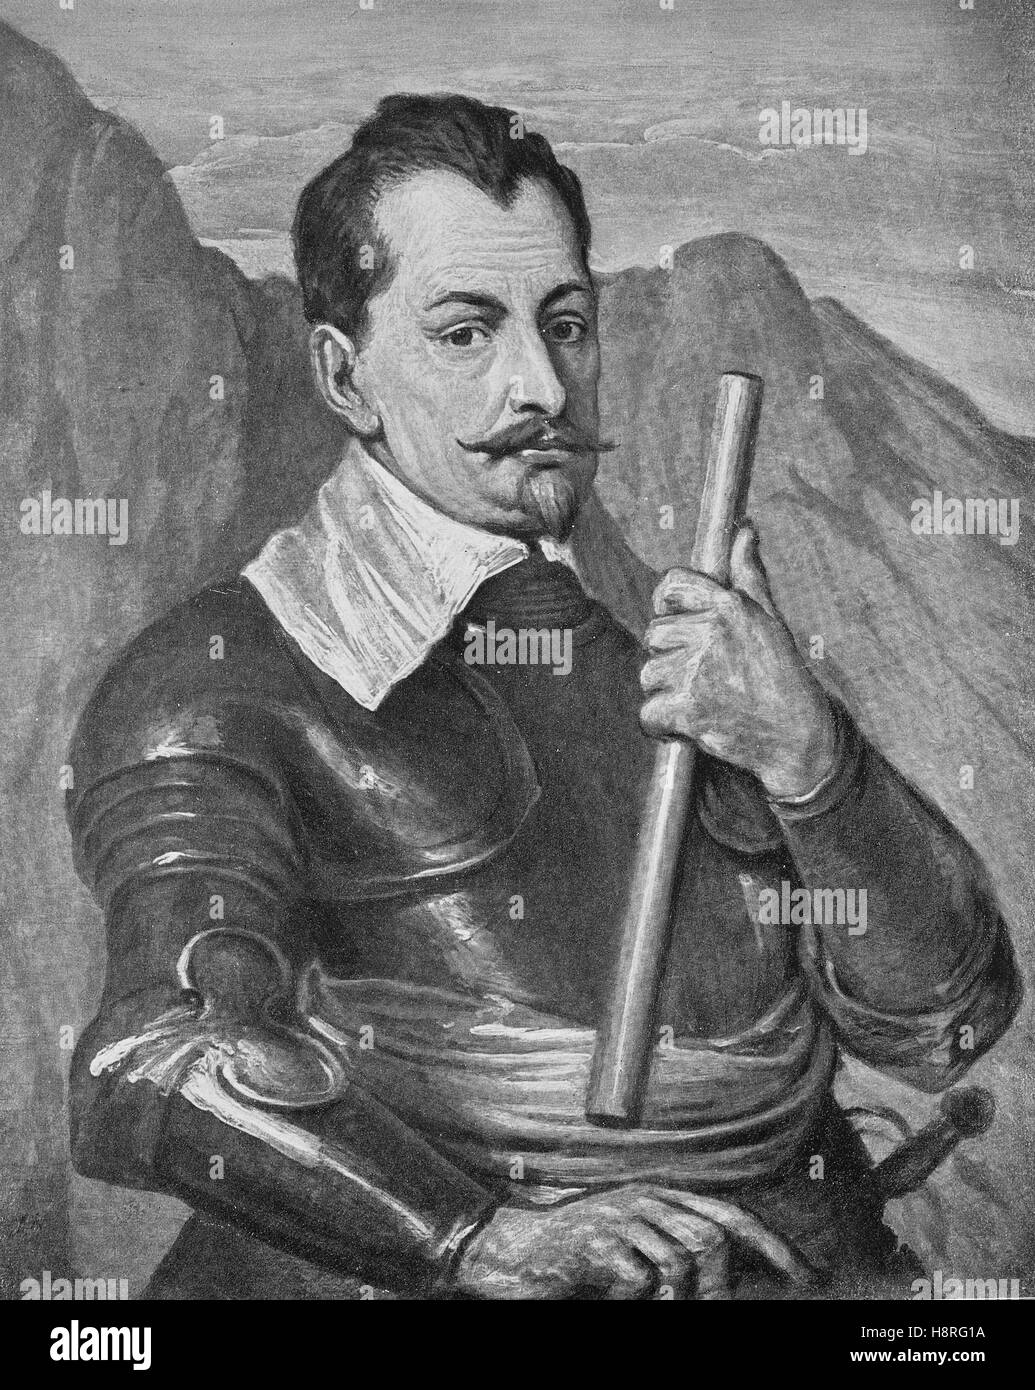 Albrecht Wenzel Eusebius von Wallenstein, also von Waldstein, was a Bohemian military leader and politician who offered his services, and an army of 30,000 to 100,000 men, during the Thirty Years' War, to the Holy Roman Emperor Ferdinand II Stock Photo